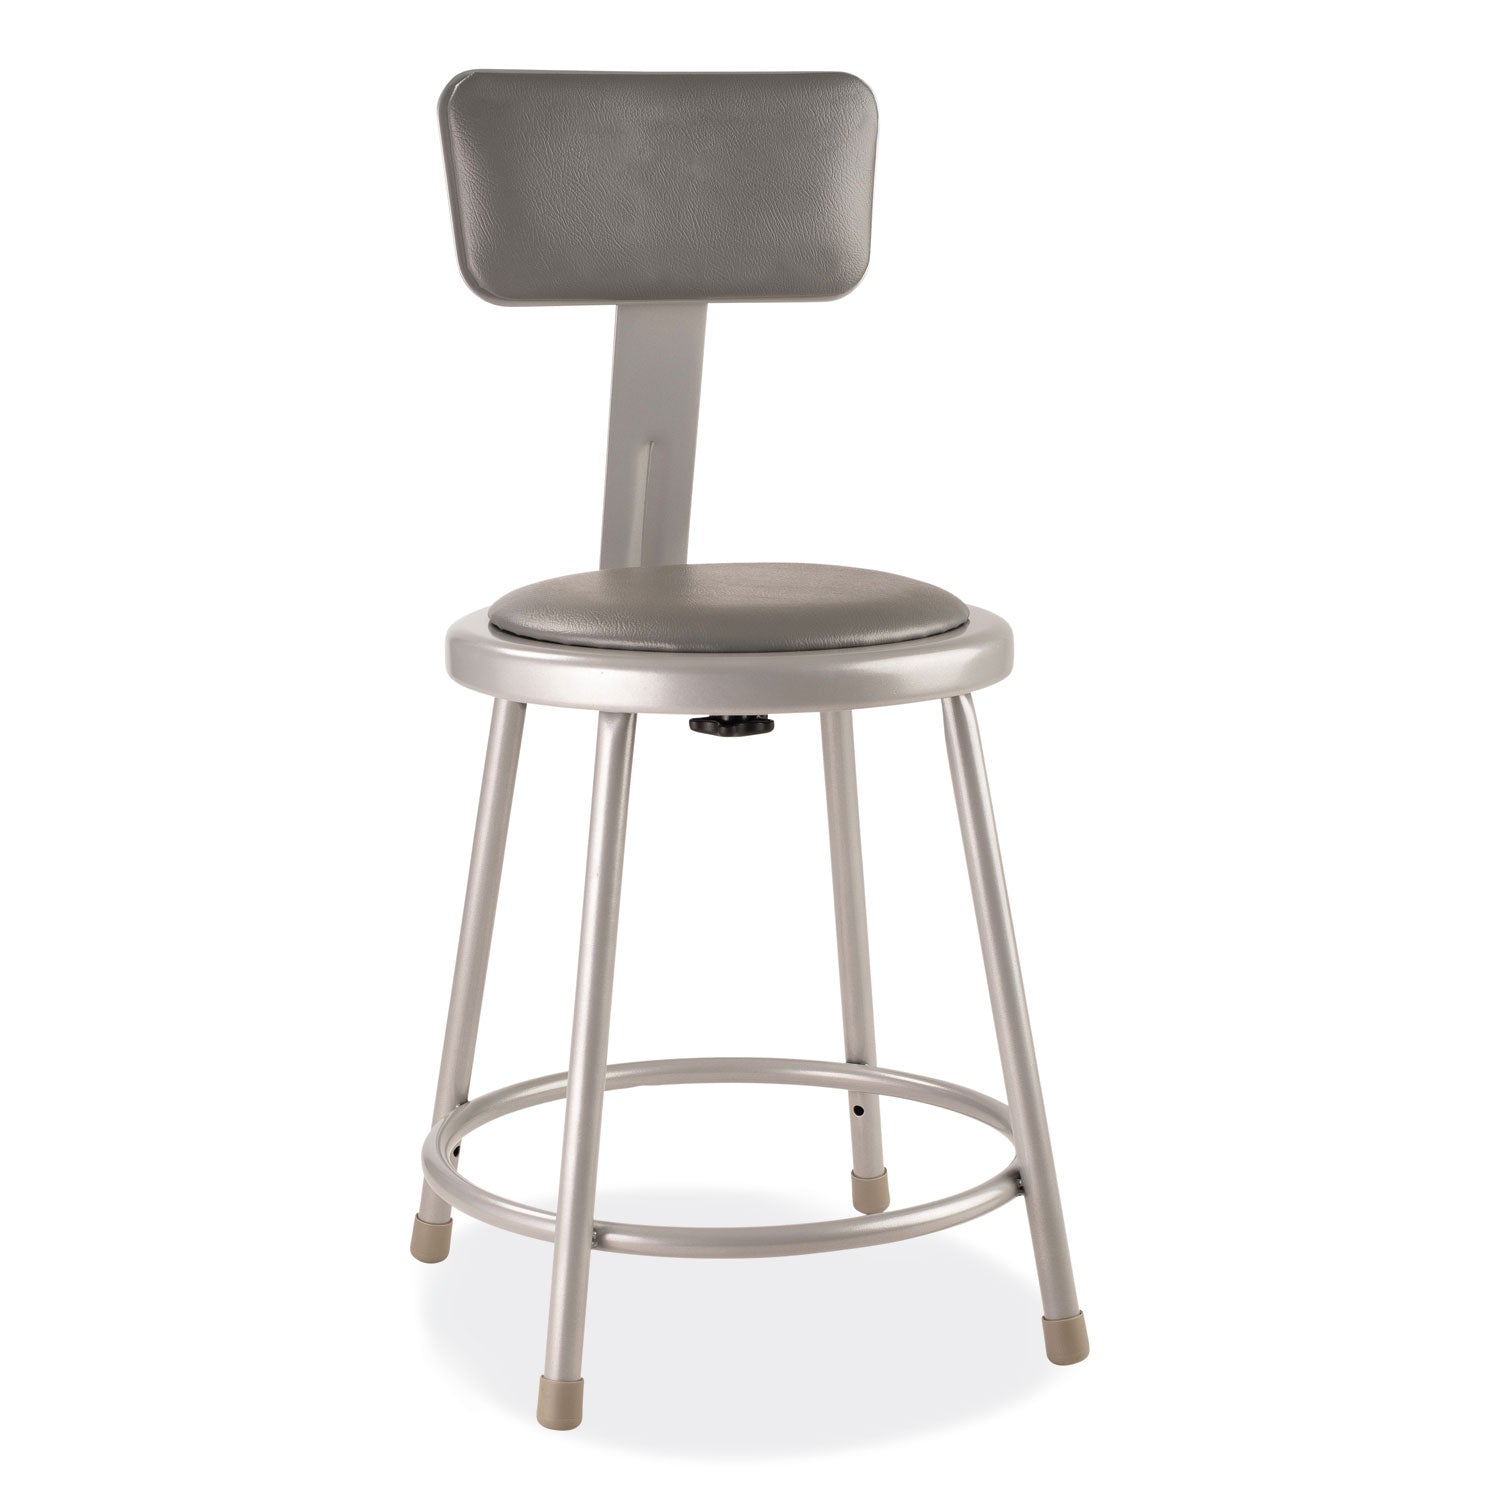 6400-series-heavy-duty-vinyl-padded-stool-w-backrest-supports-300-lb-18-seat-ht-gray-seat-back-baseships-in-1-3-bus-days_nps6418b - 1